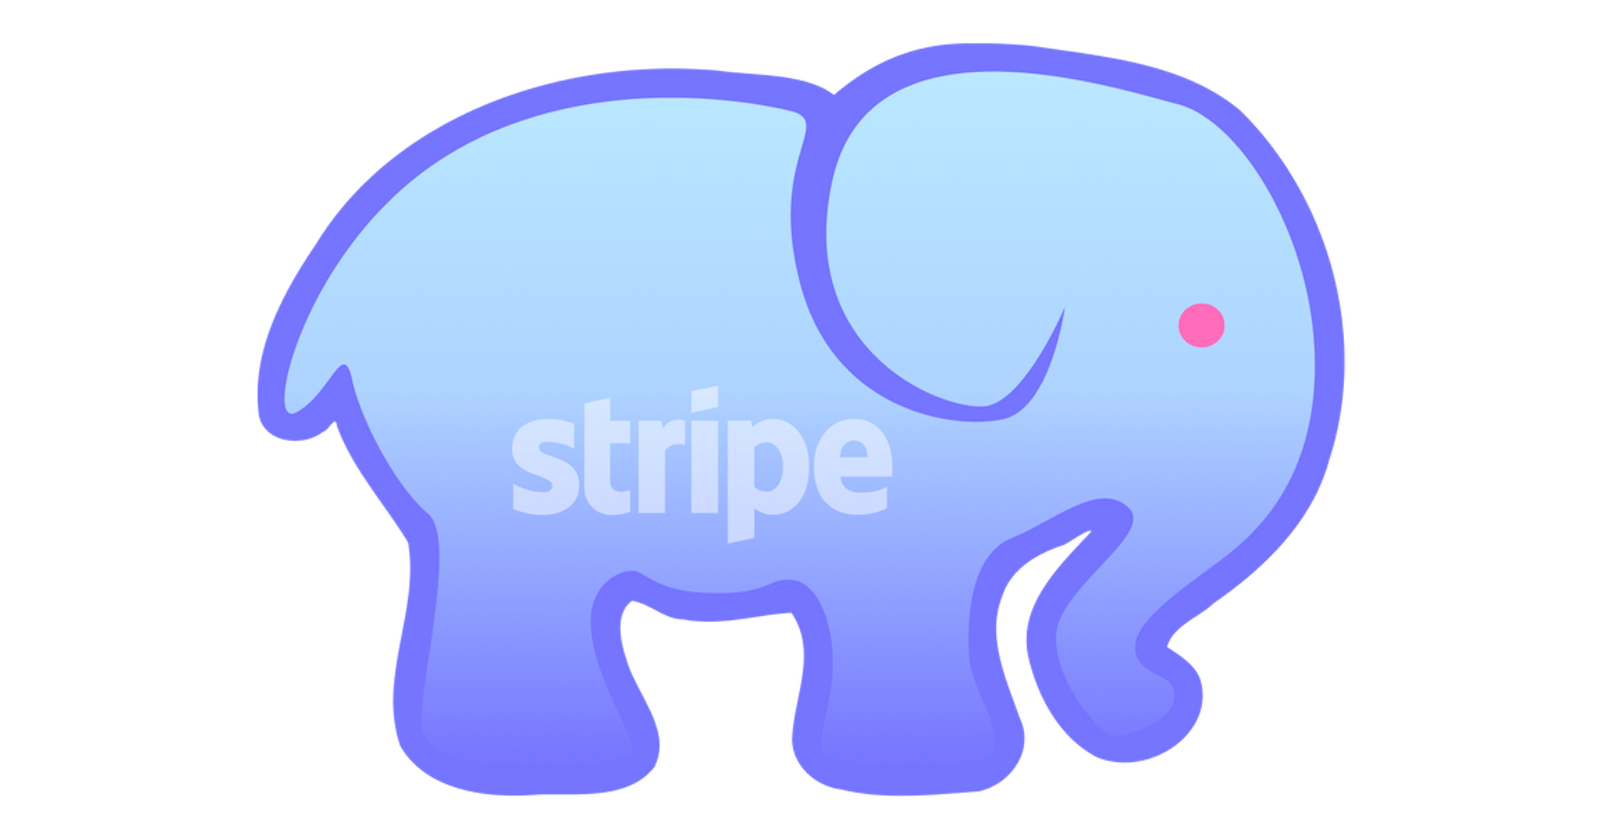 Visualize Stripe Payments Data in Postgres using SQL